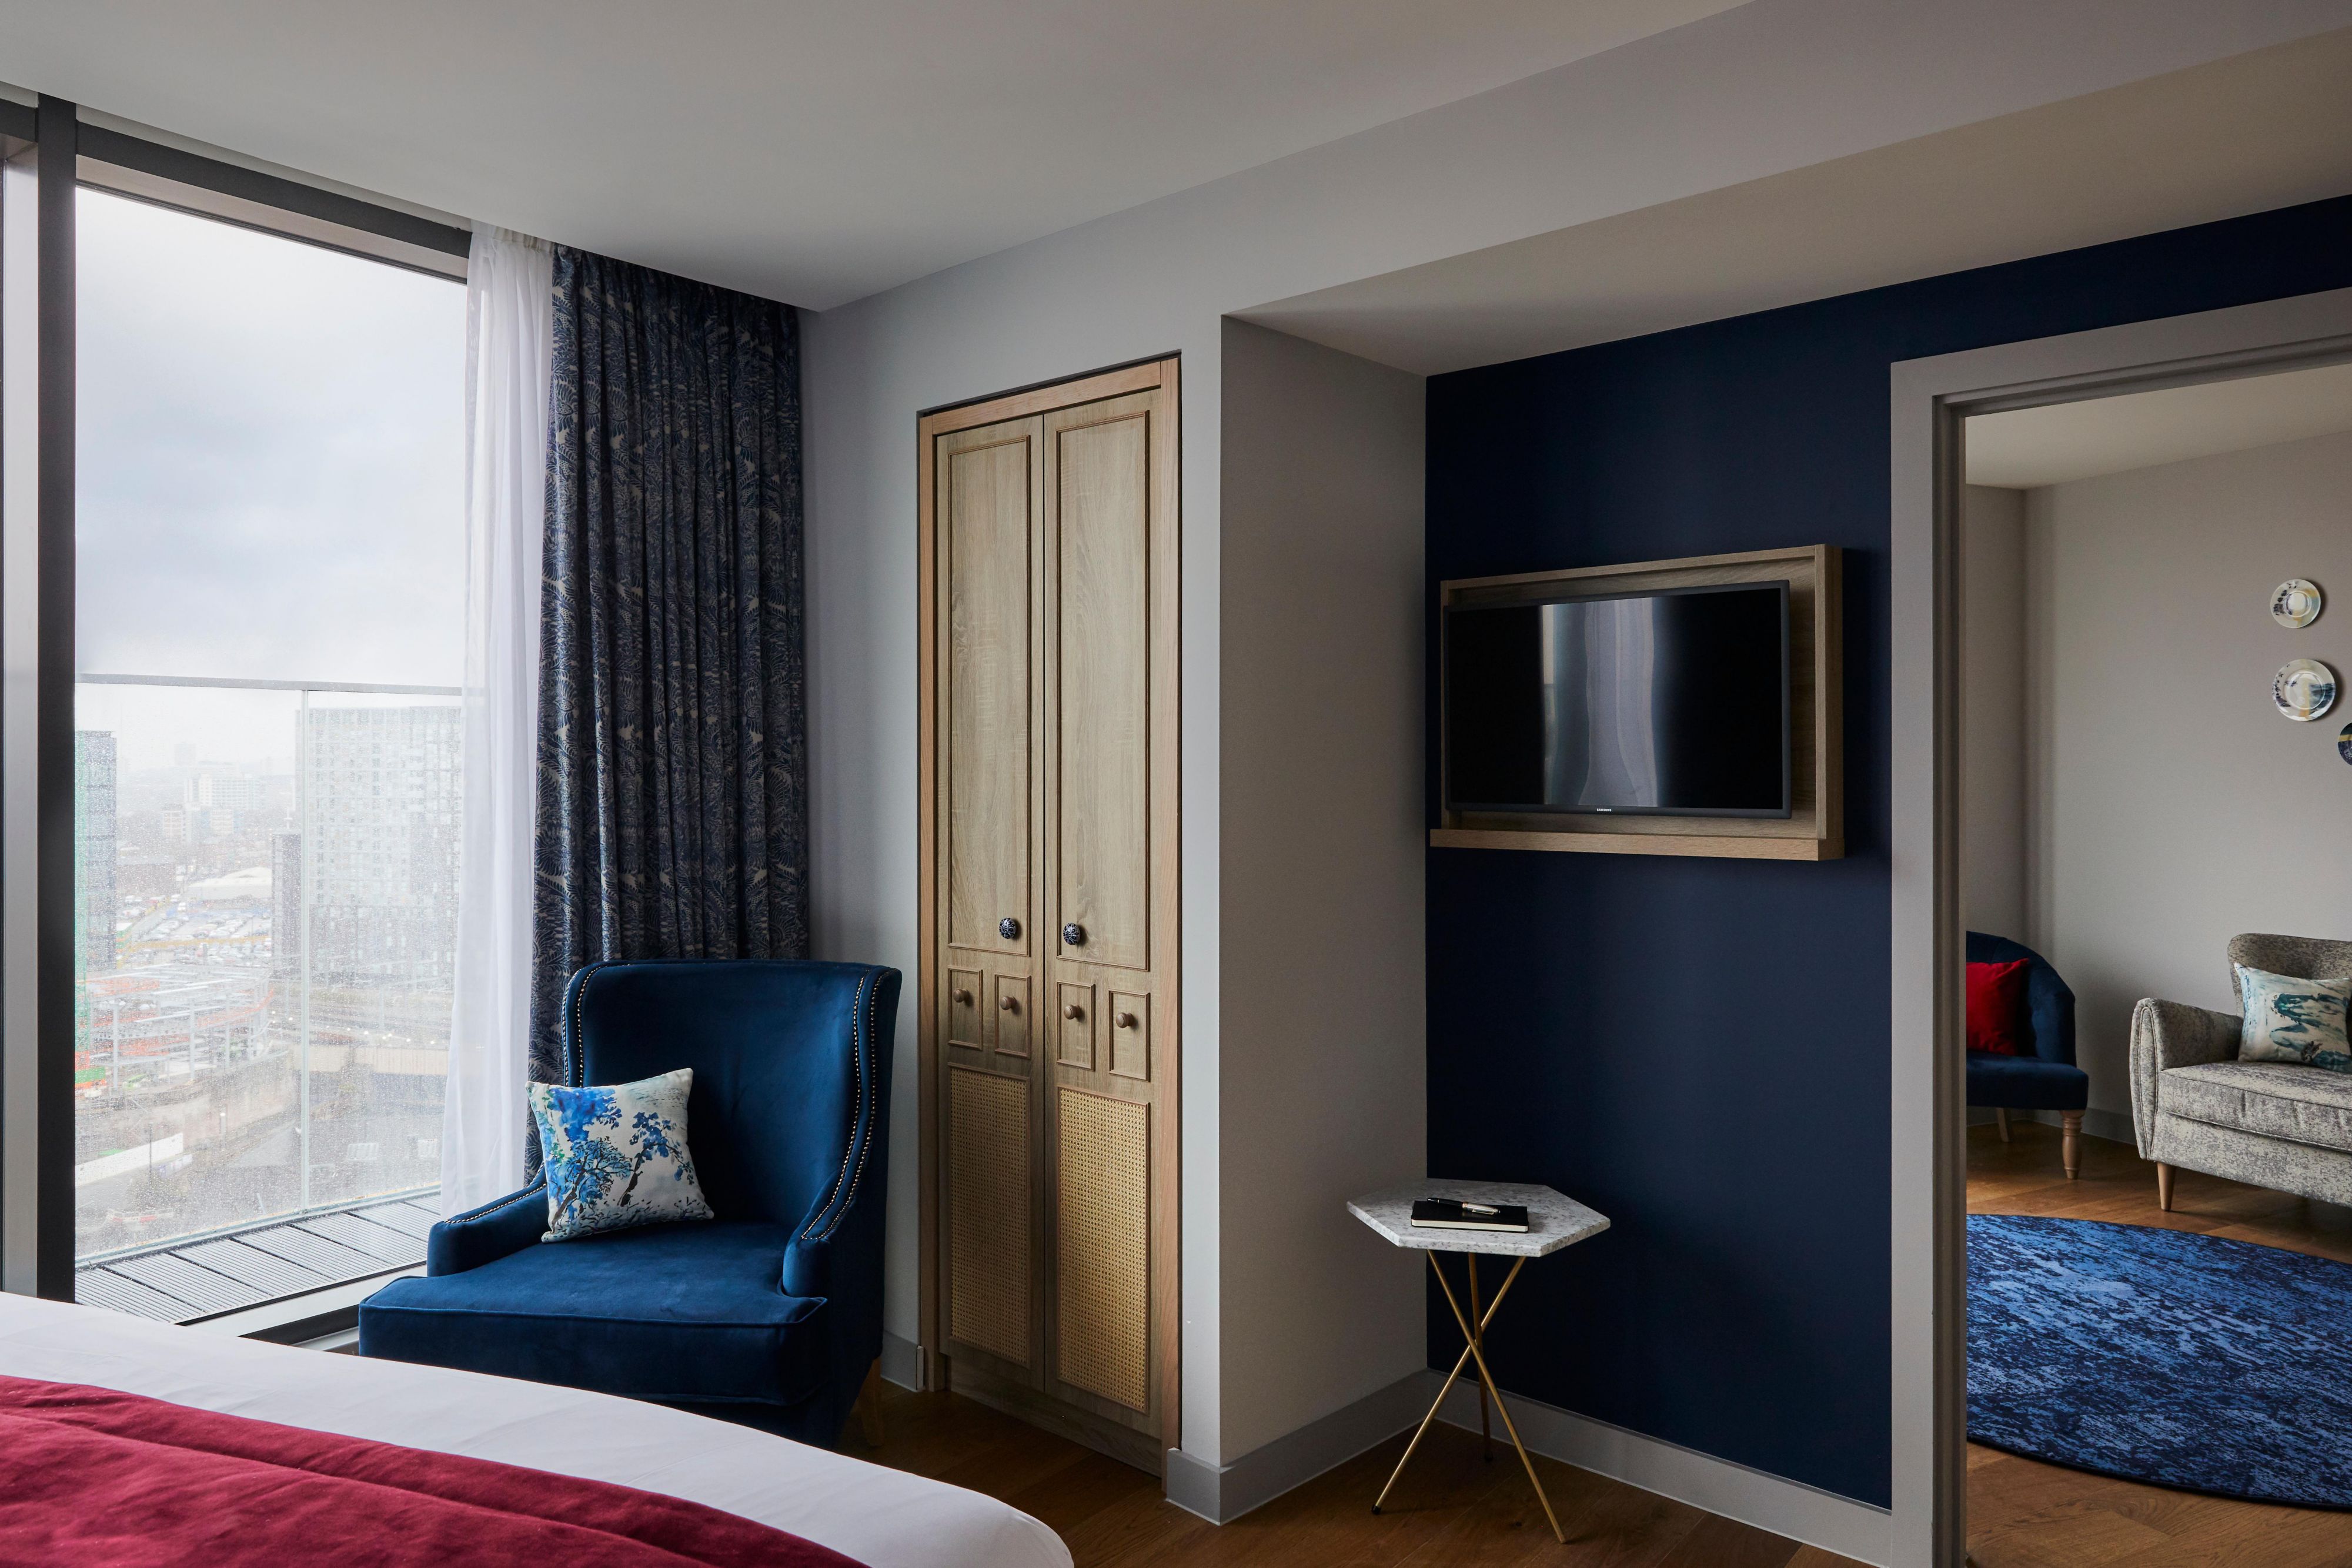 Our superb suites offer floor-to-ceiling windows with private balconies accessible from the spacious lounge area, so you can enjoy the city skyline view. Relax in our uniquely designed boutique rooms inspired by the vibrant history of the local neighbourhood.